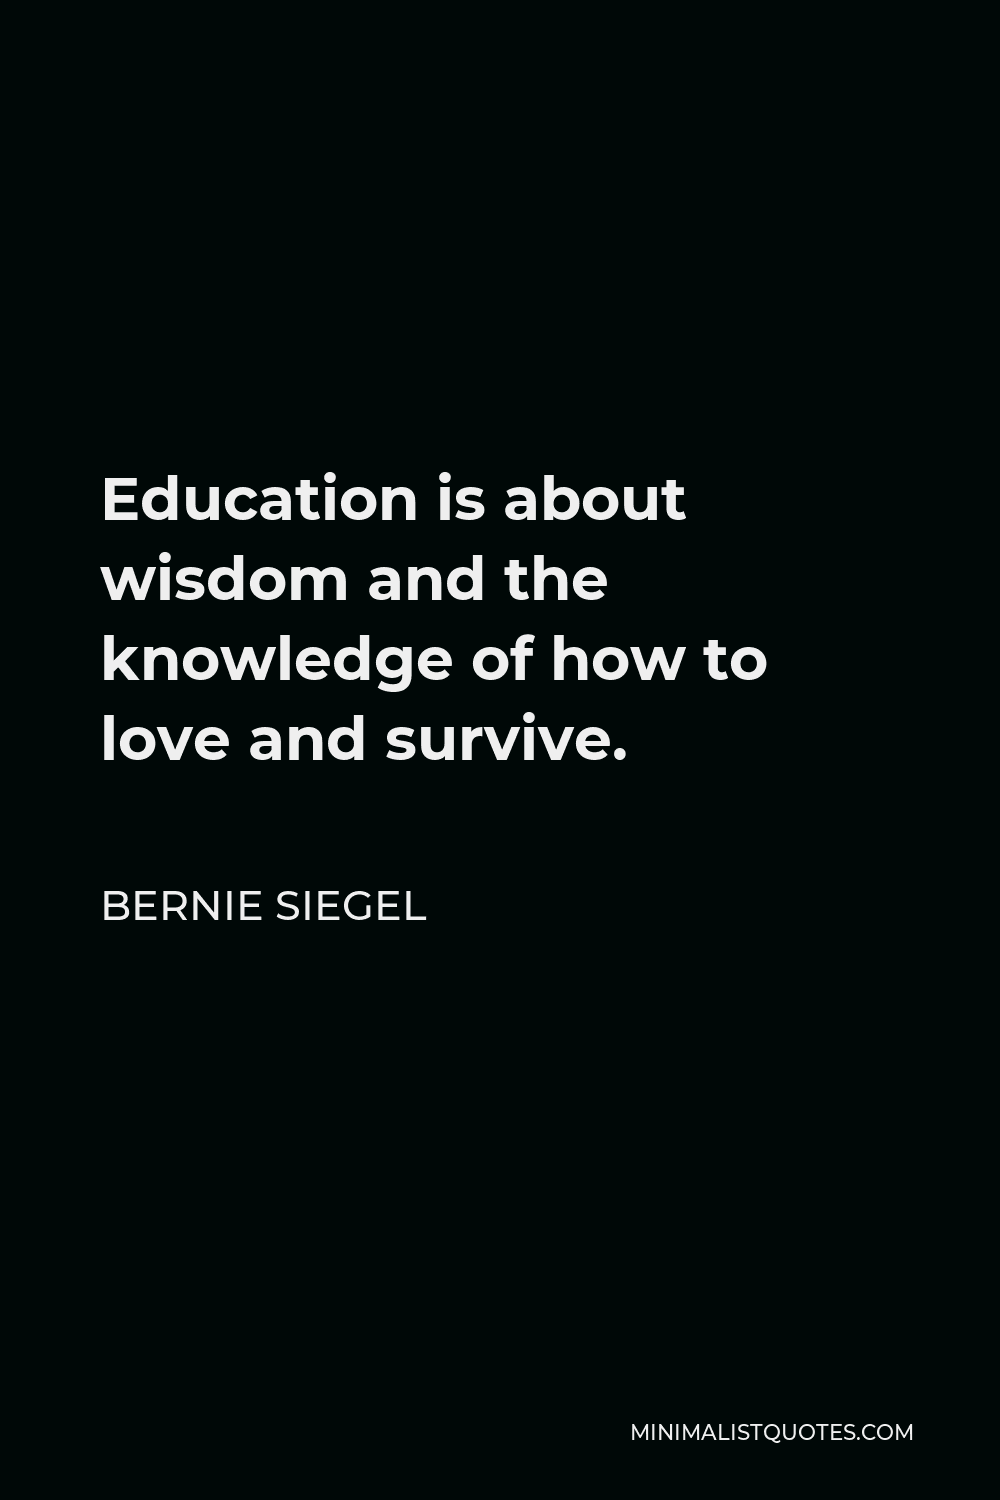 Bernie Siegel Quote - Education is about wisdom and the knowledge of how to love and survive.